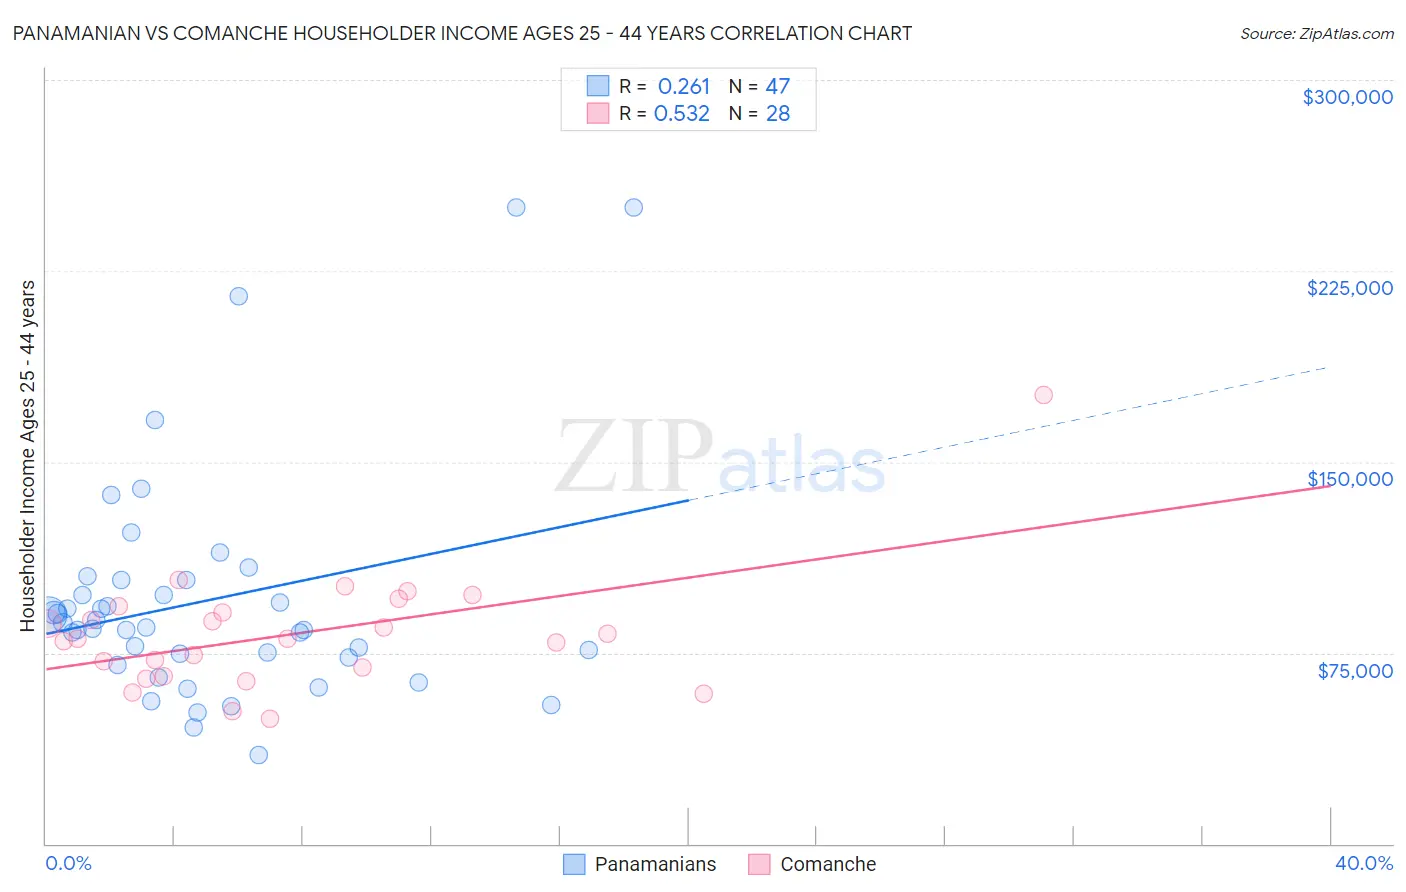 Panamanian vs Comanche Householder Income Ages 25 - 44 years